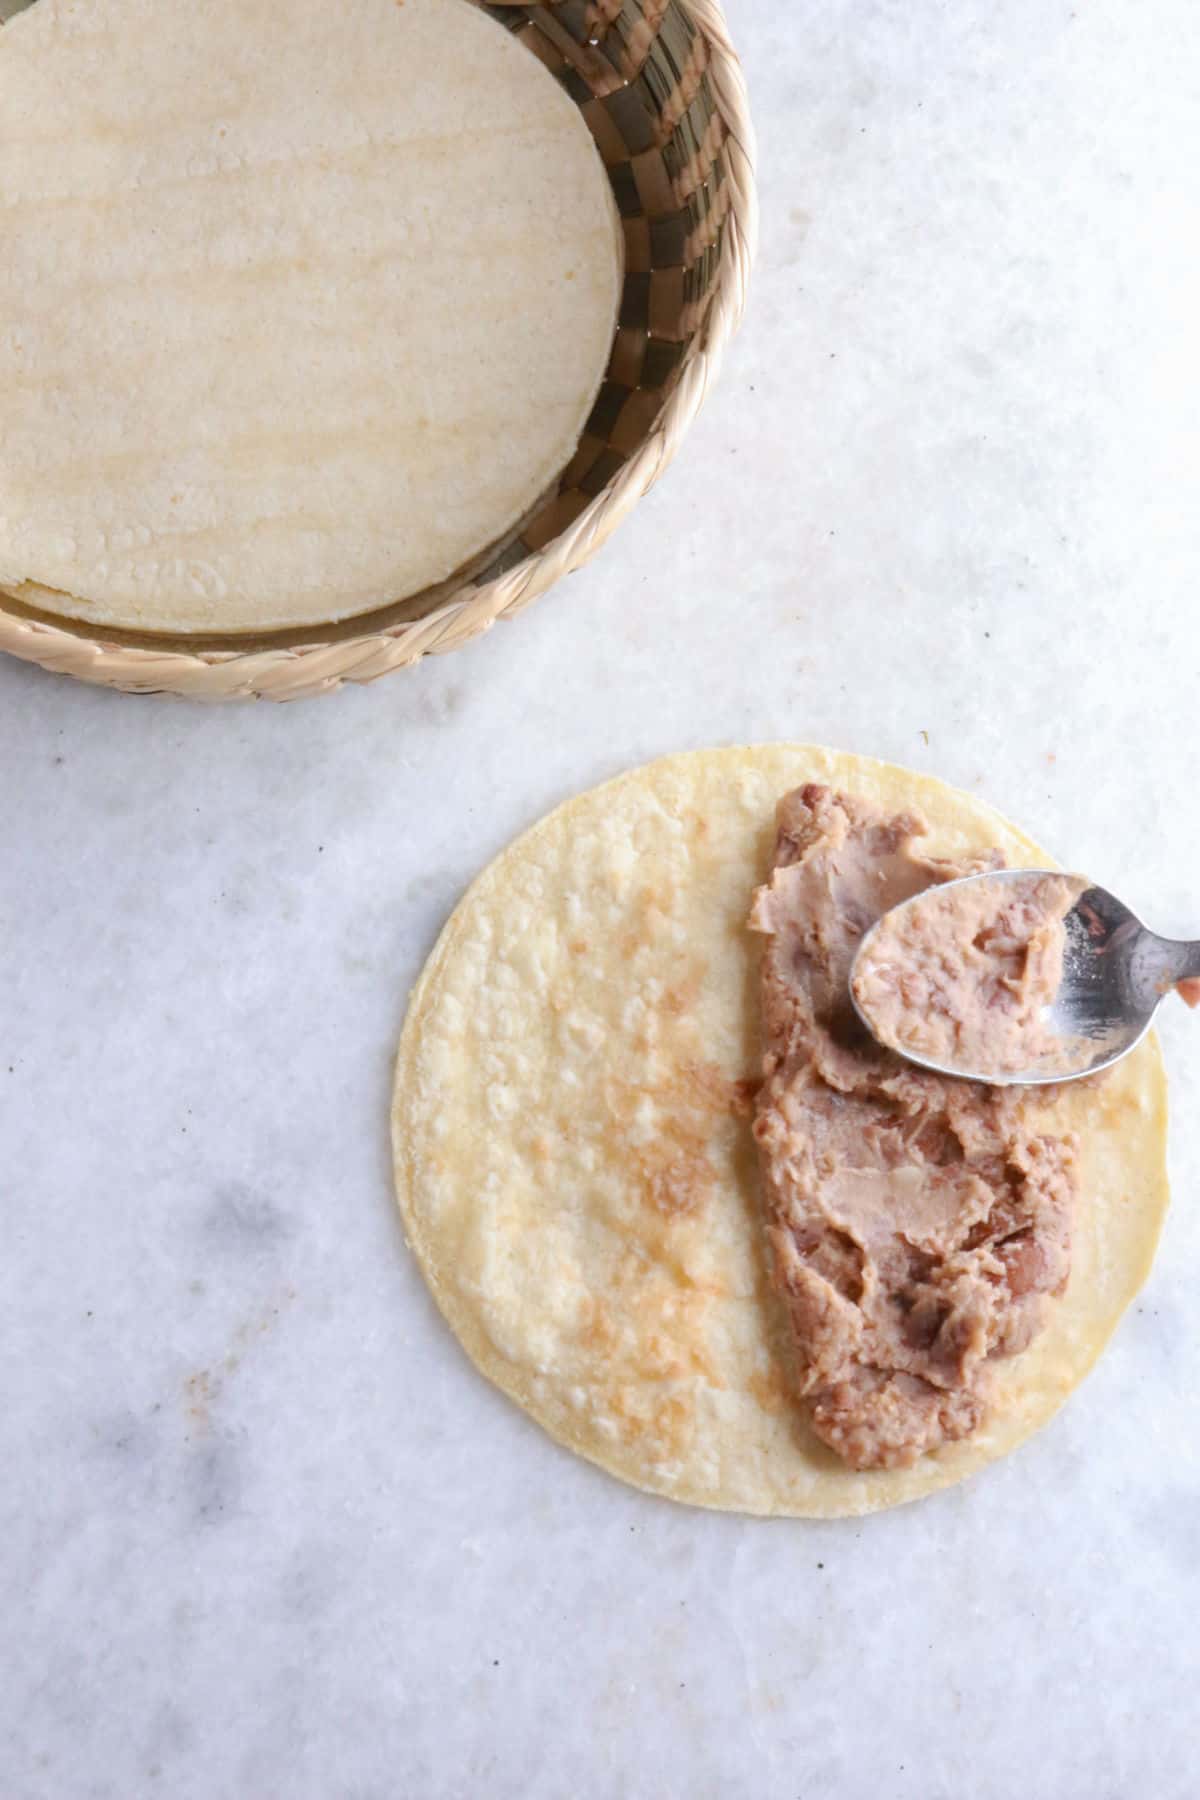 Using a spoon to spread refried beans on a warm corn tortilla